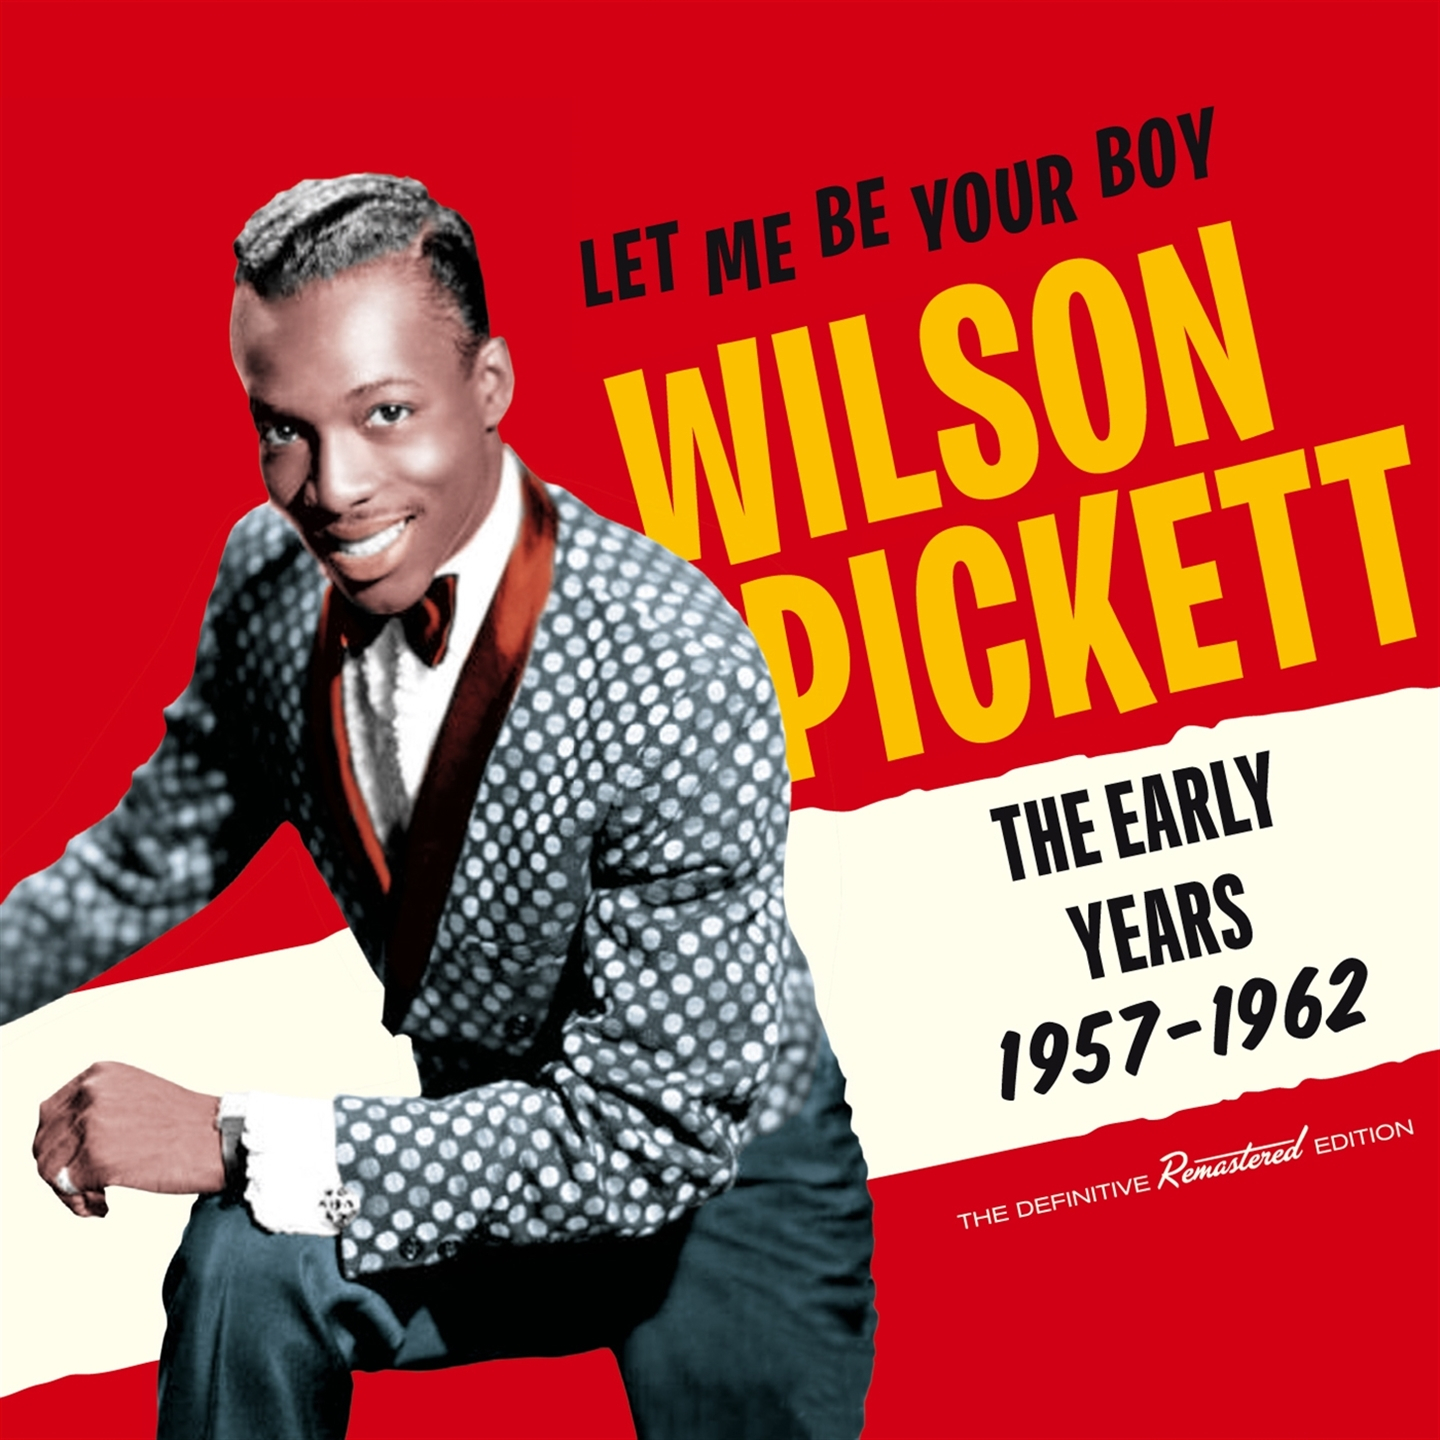 LET ME BE YOUR BOY - THE EARLY YEARS, 1957-1962